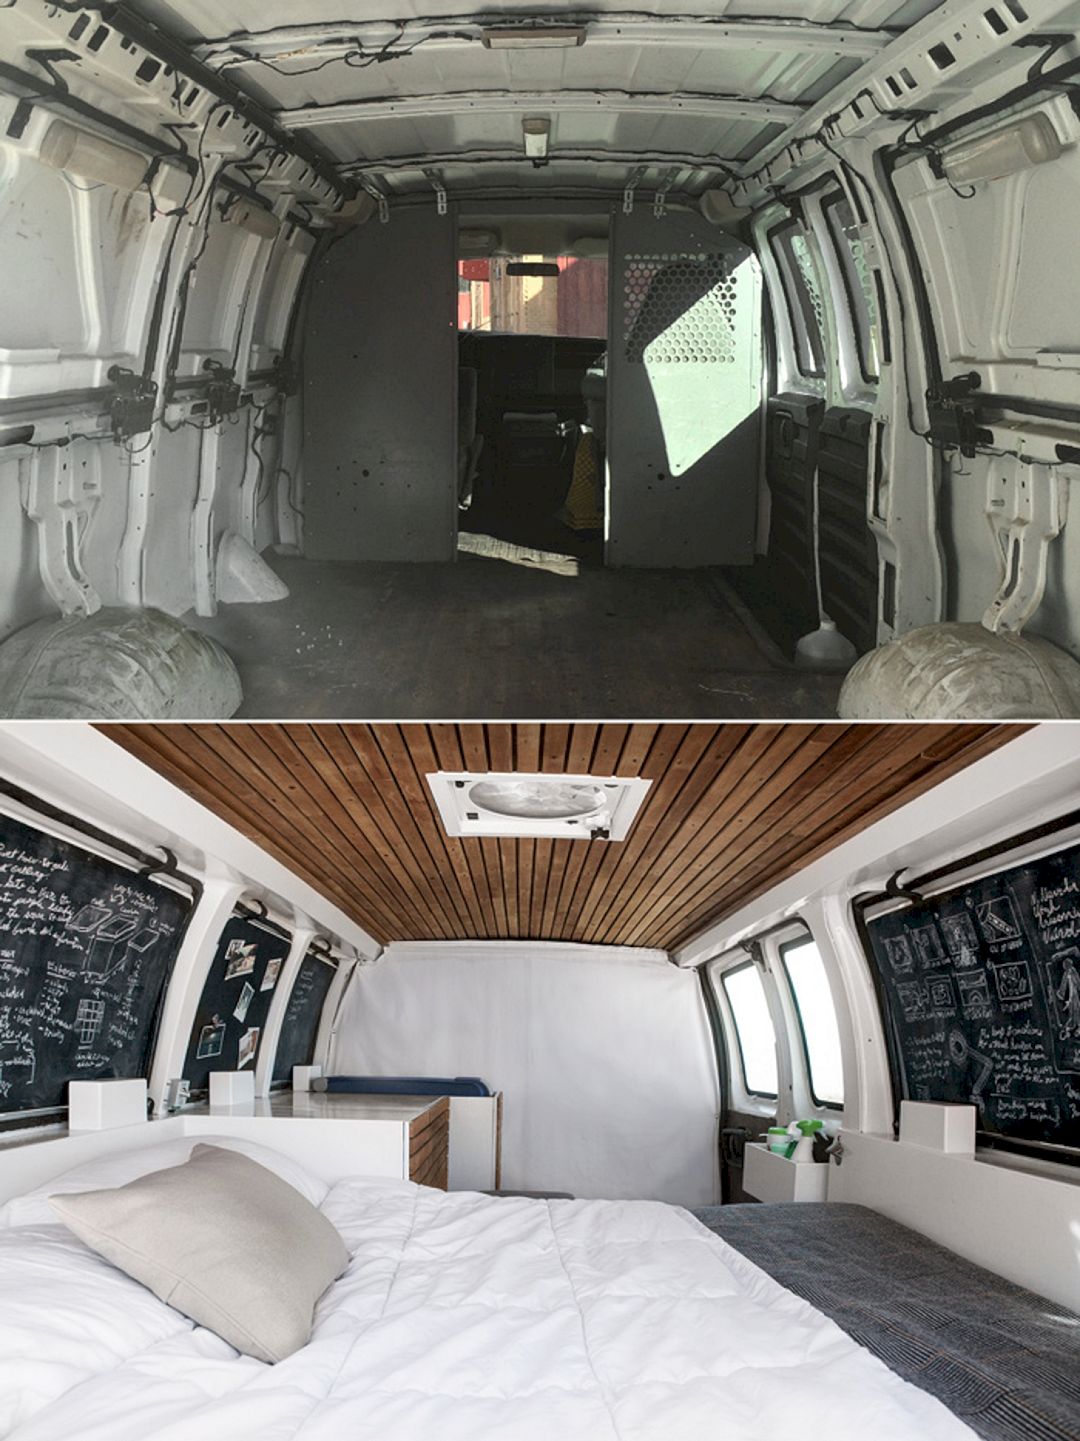 Diy Camper Van Conversion To Make Your Road Trips Awesome ...